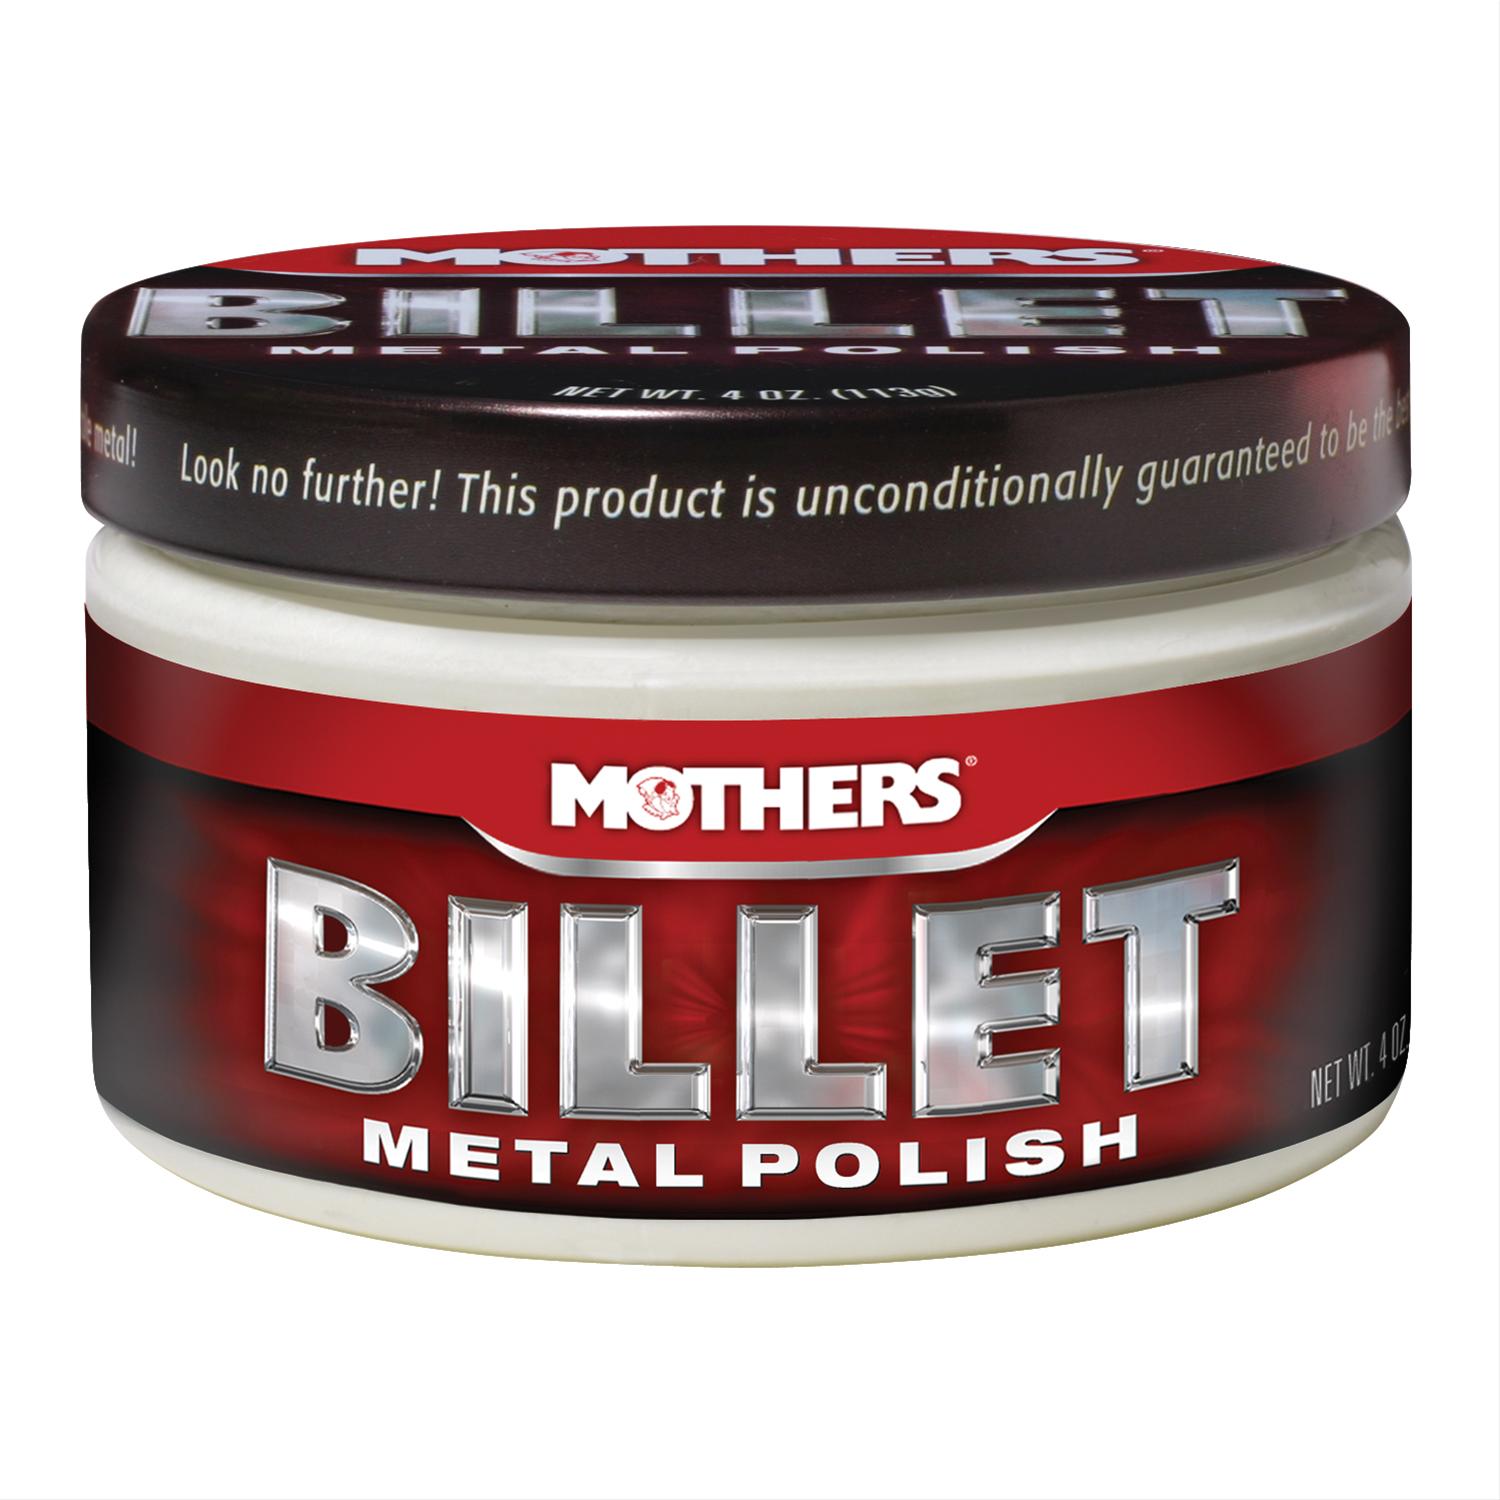 Review: Mother's Mag & Aluminum Polish